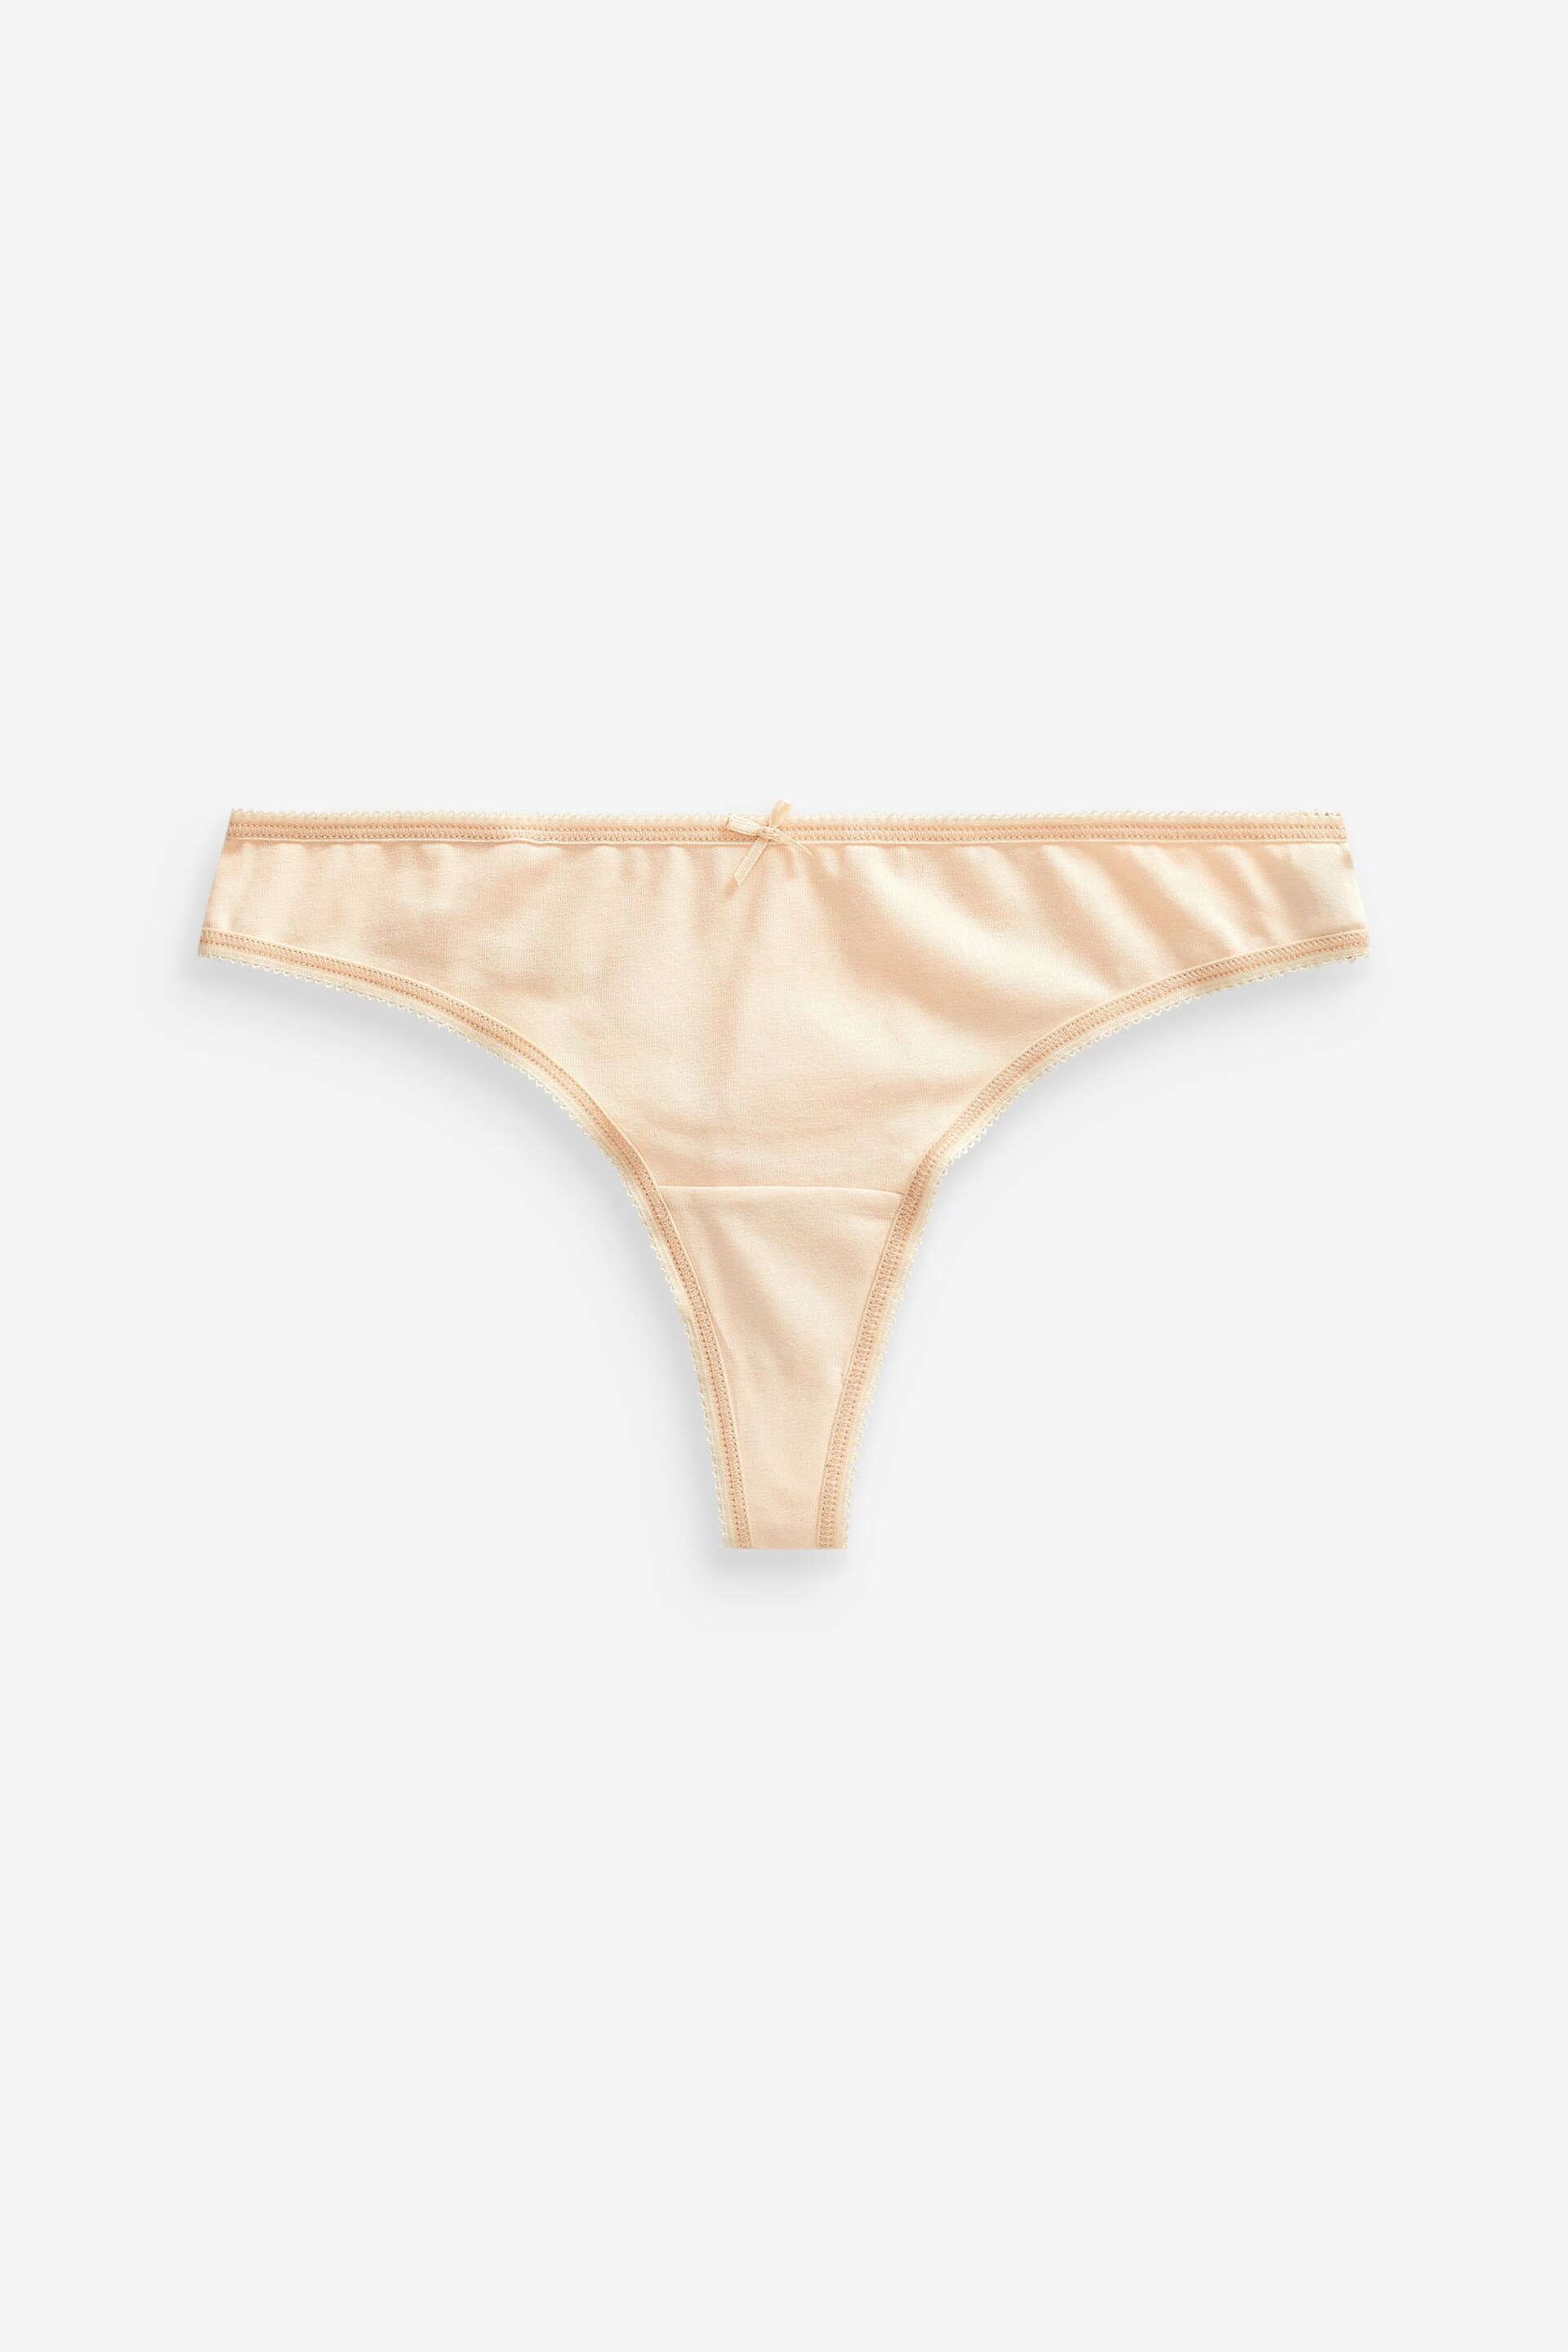 Nude Thong Cotton Rich Knickers 4 Pack - Image 2 of 5